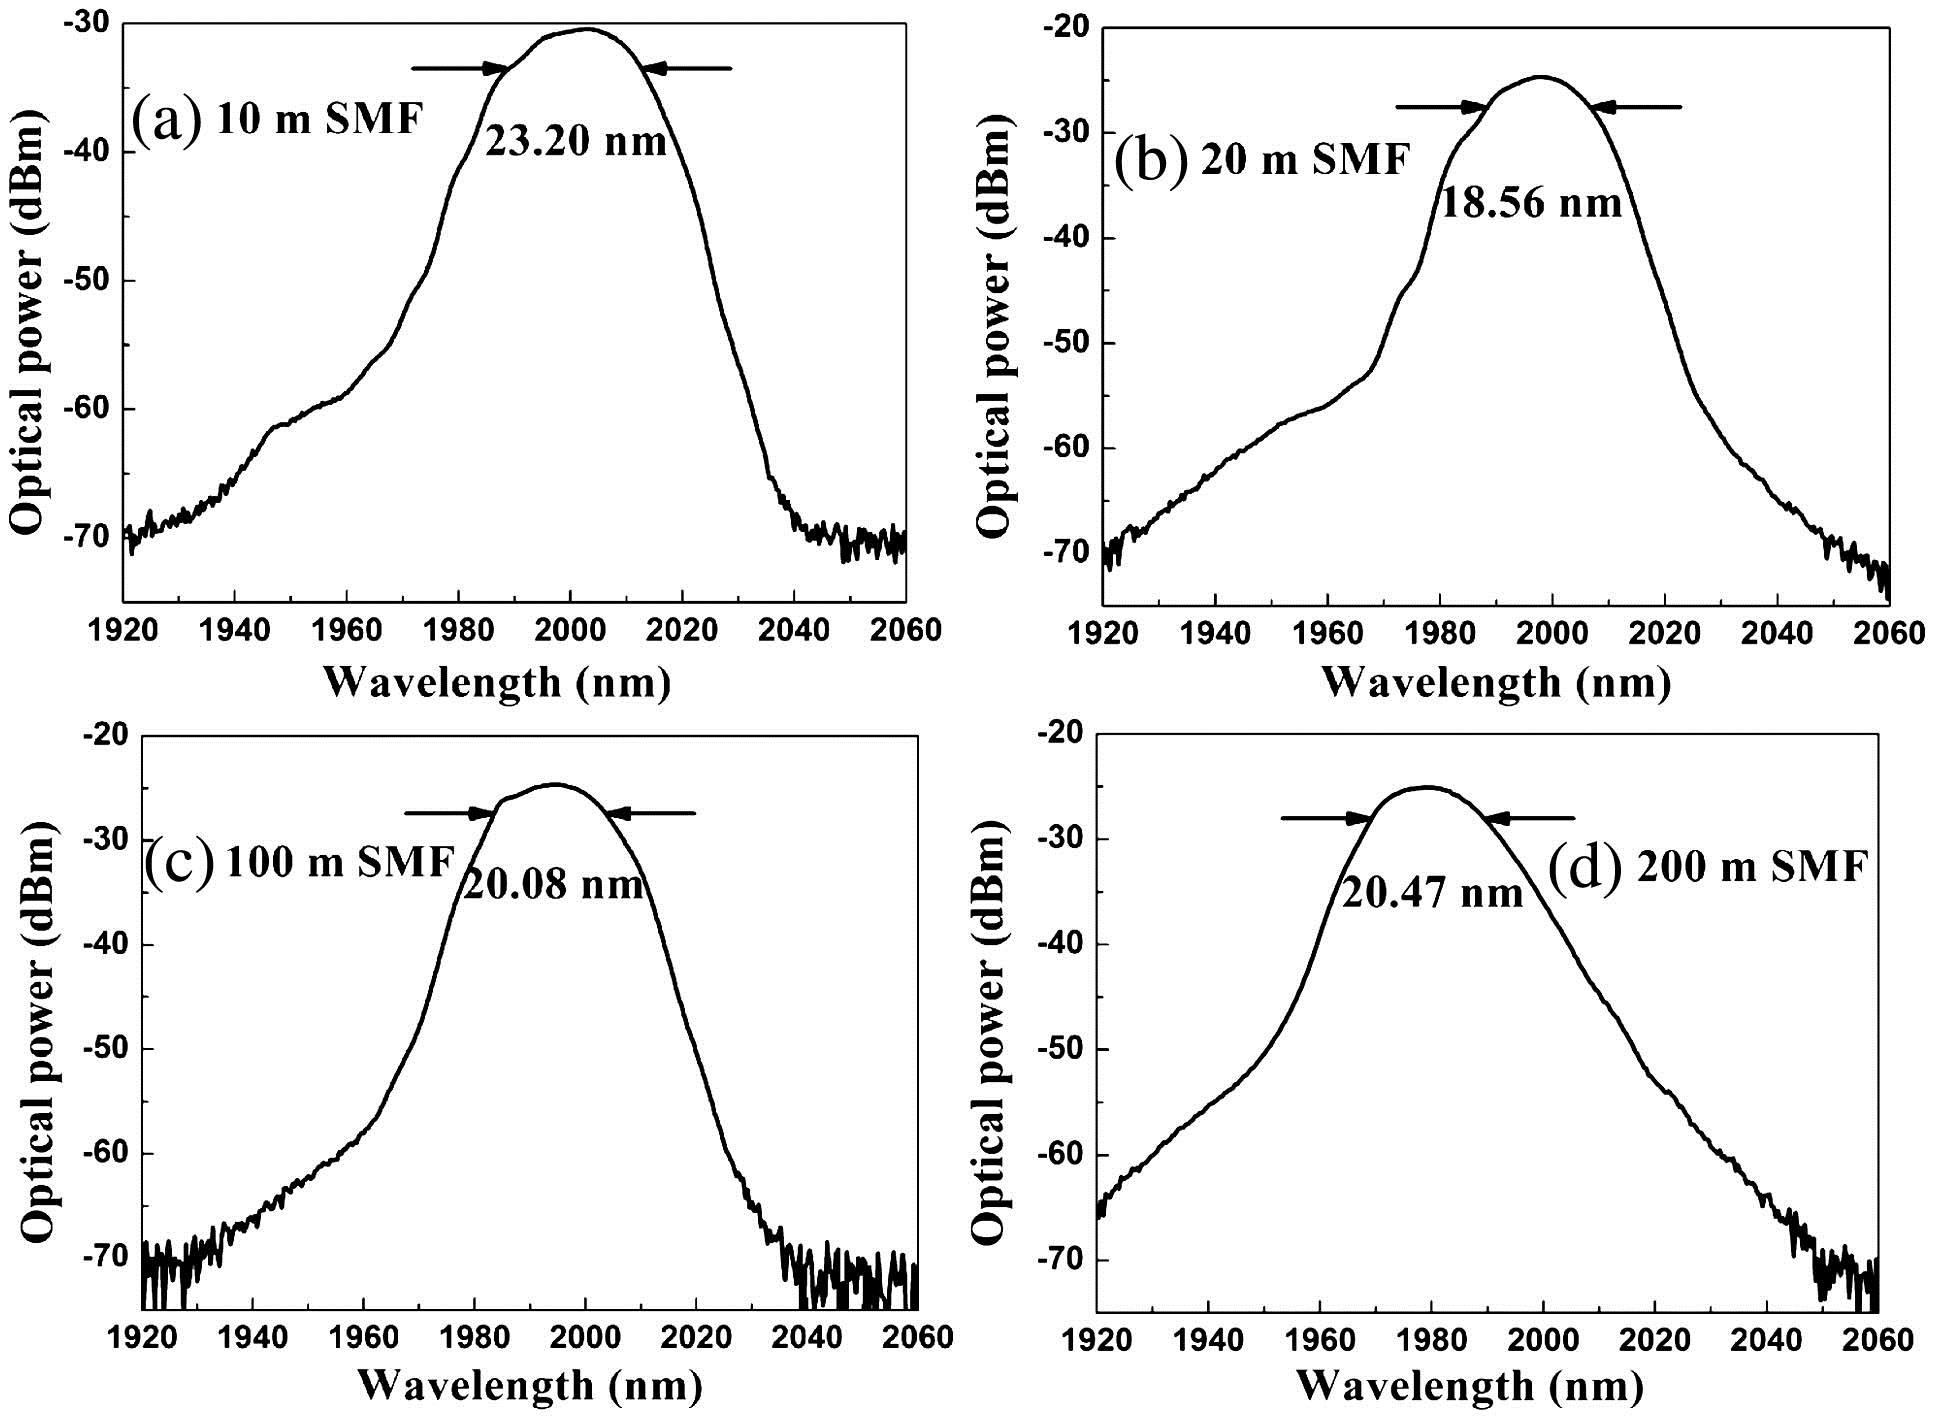 Spectra of the NL pulse with different length of SMFs.